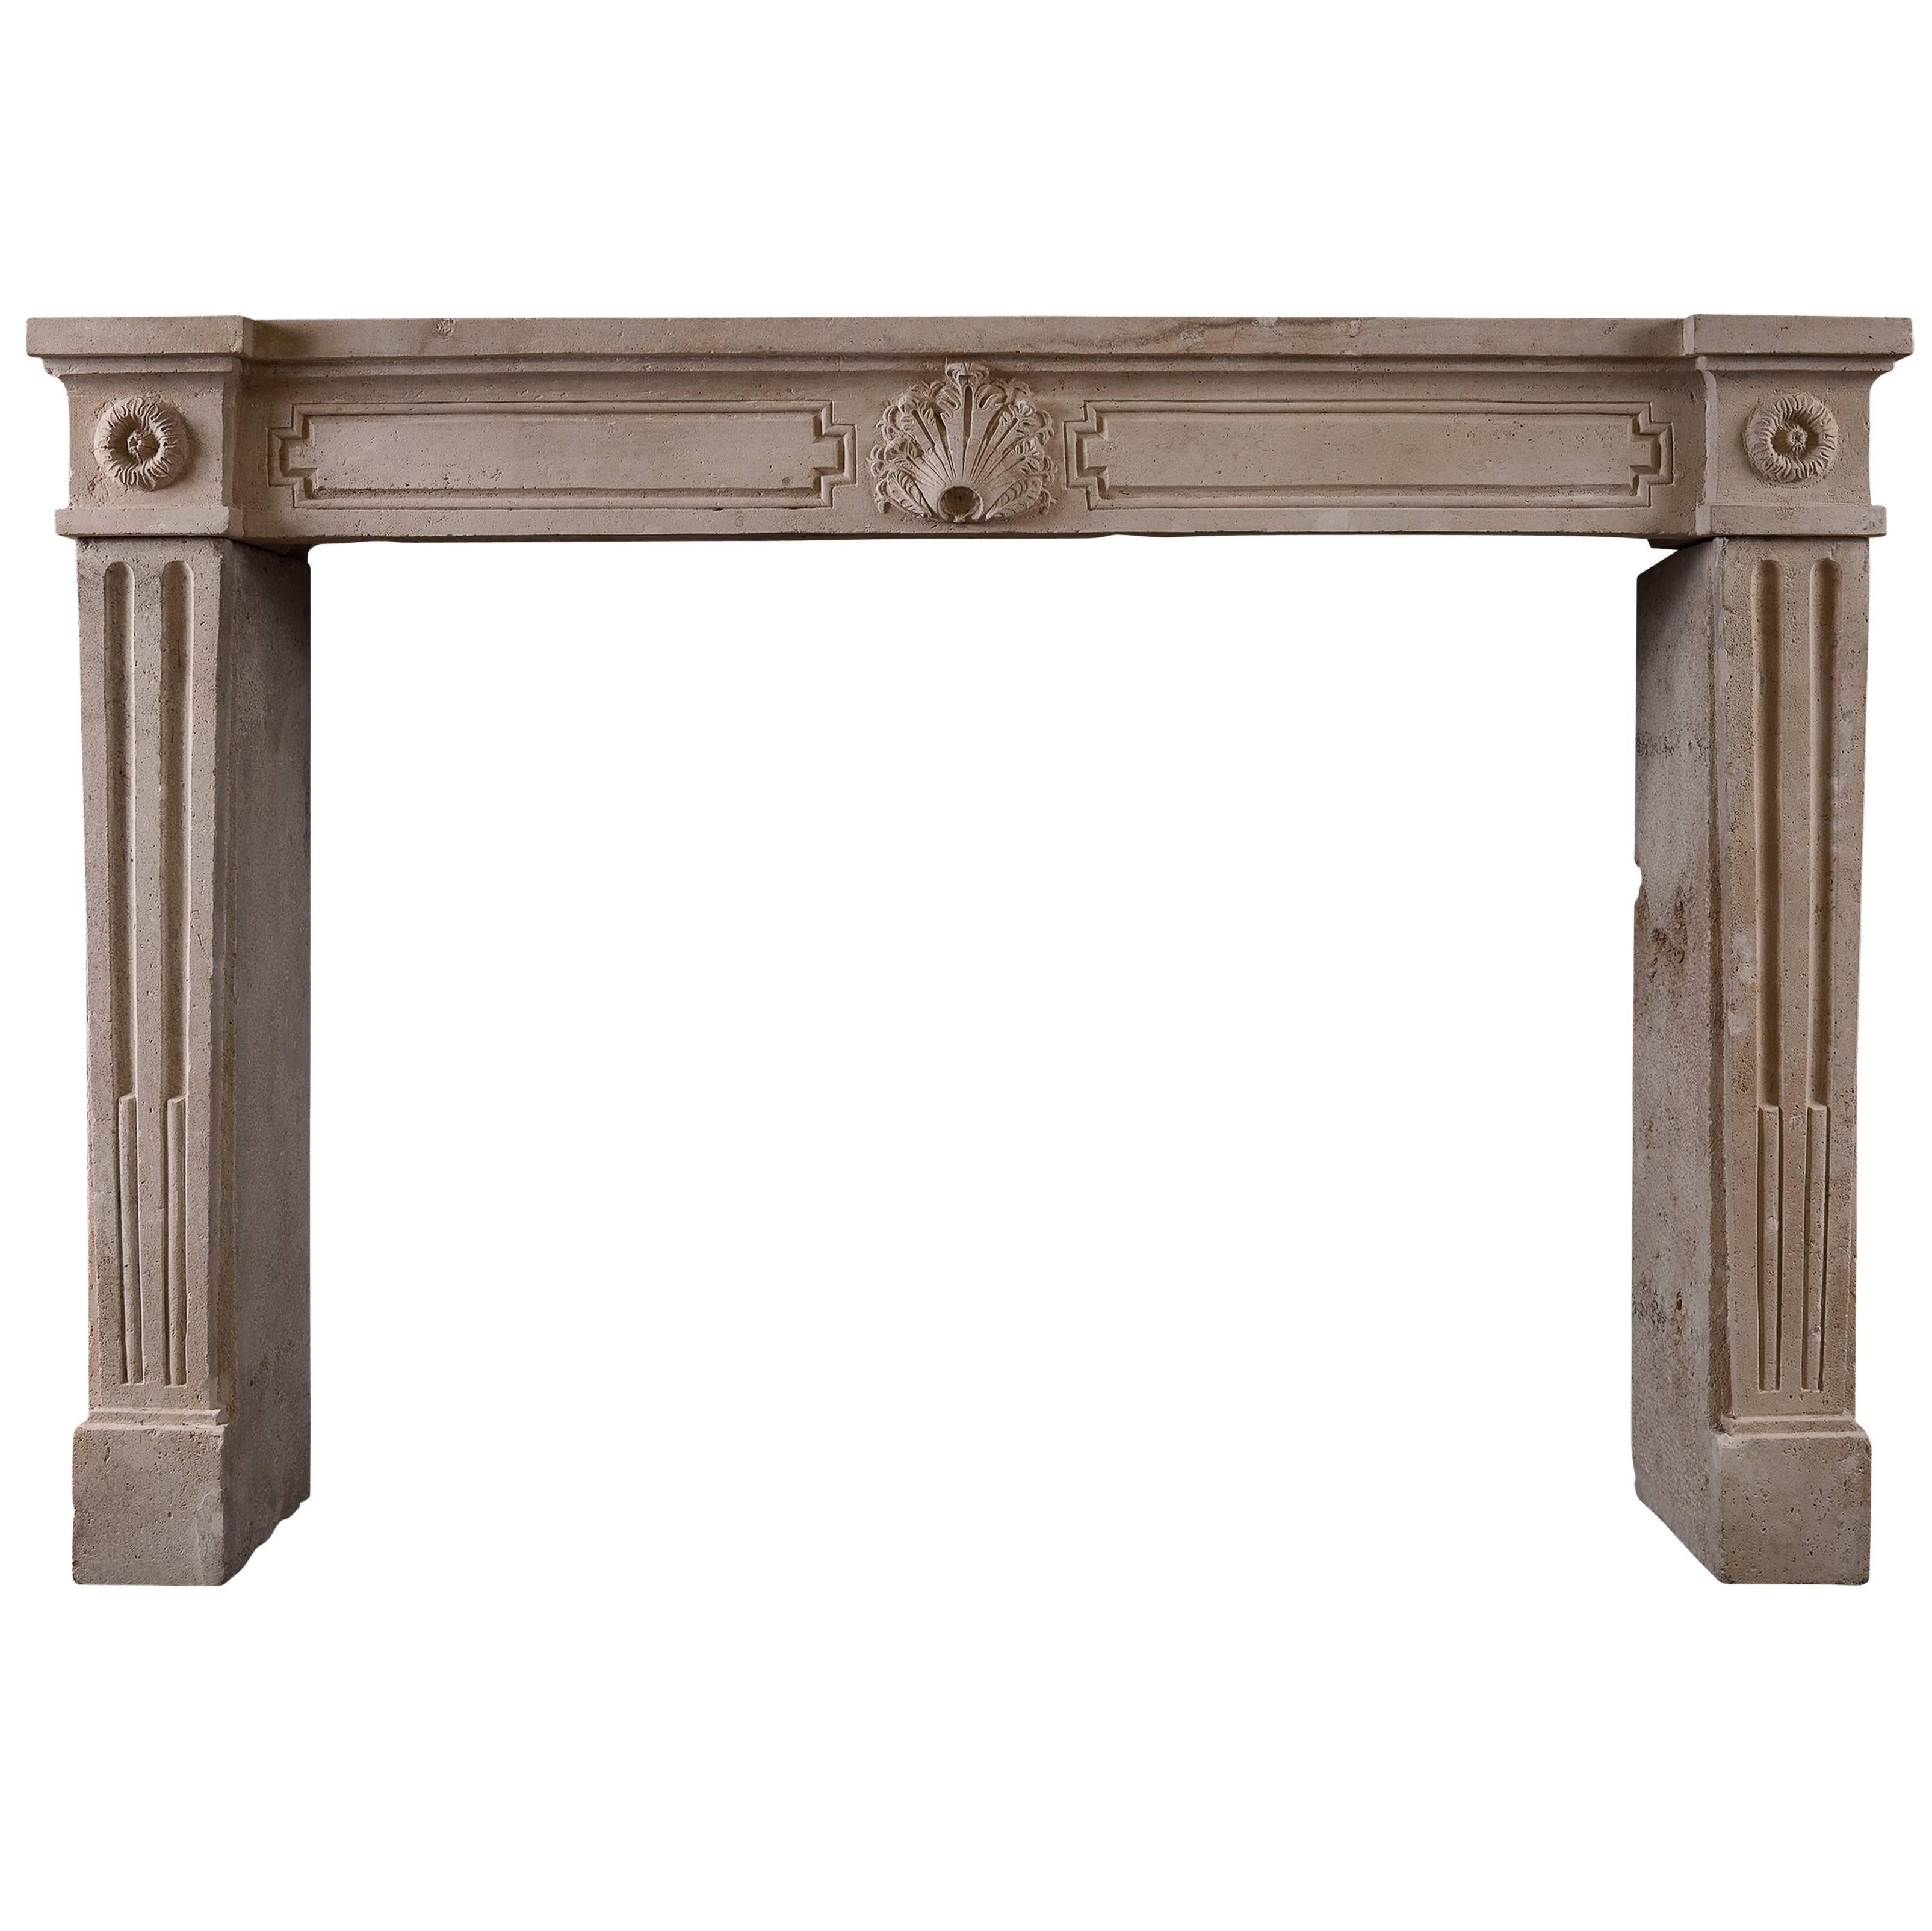 Rustic French Louis XVI Antique Fireplace For Sale